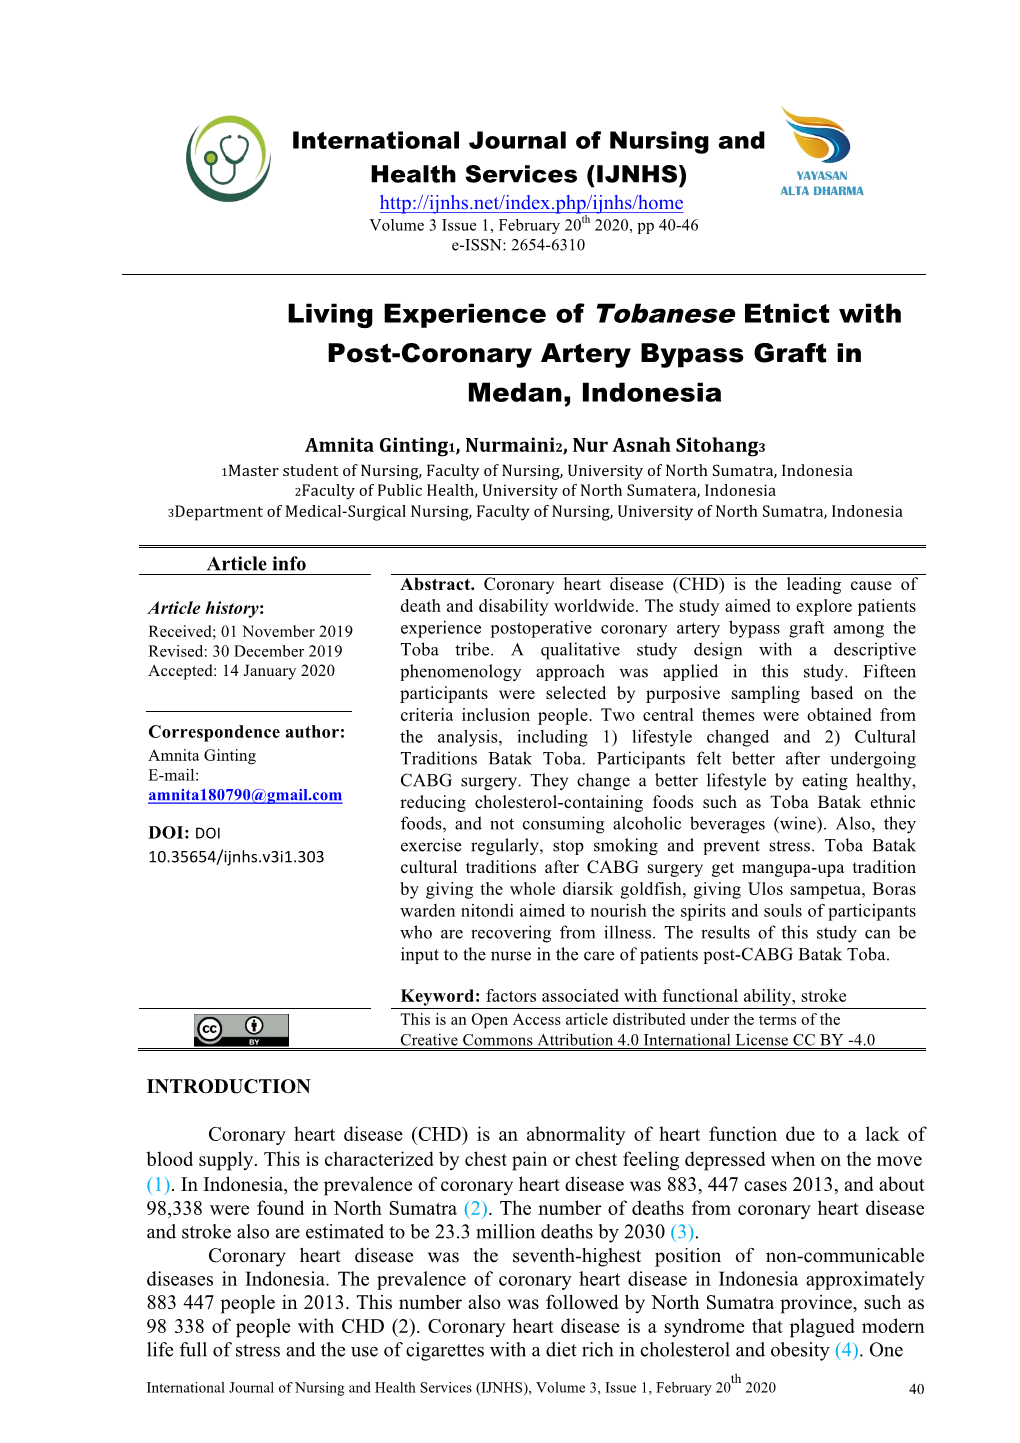 Living Experience of Tobanese Etnict with Post-Coronary Artery Bypass Graft in Medan, Indonesia